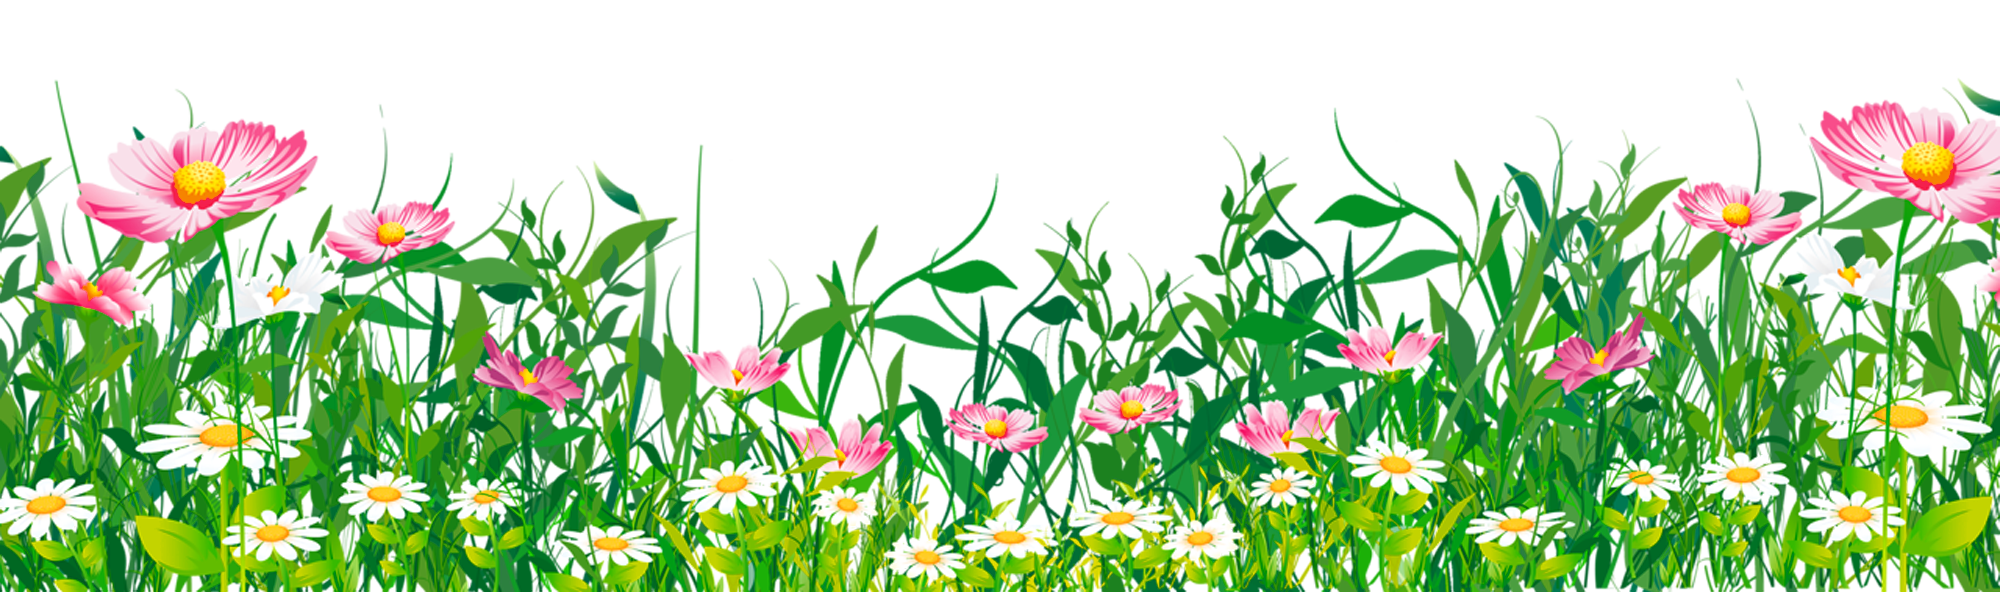 free clipart grass and flowers - photo #14